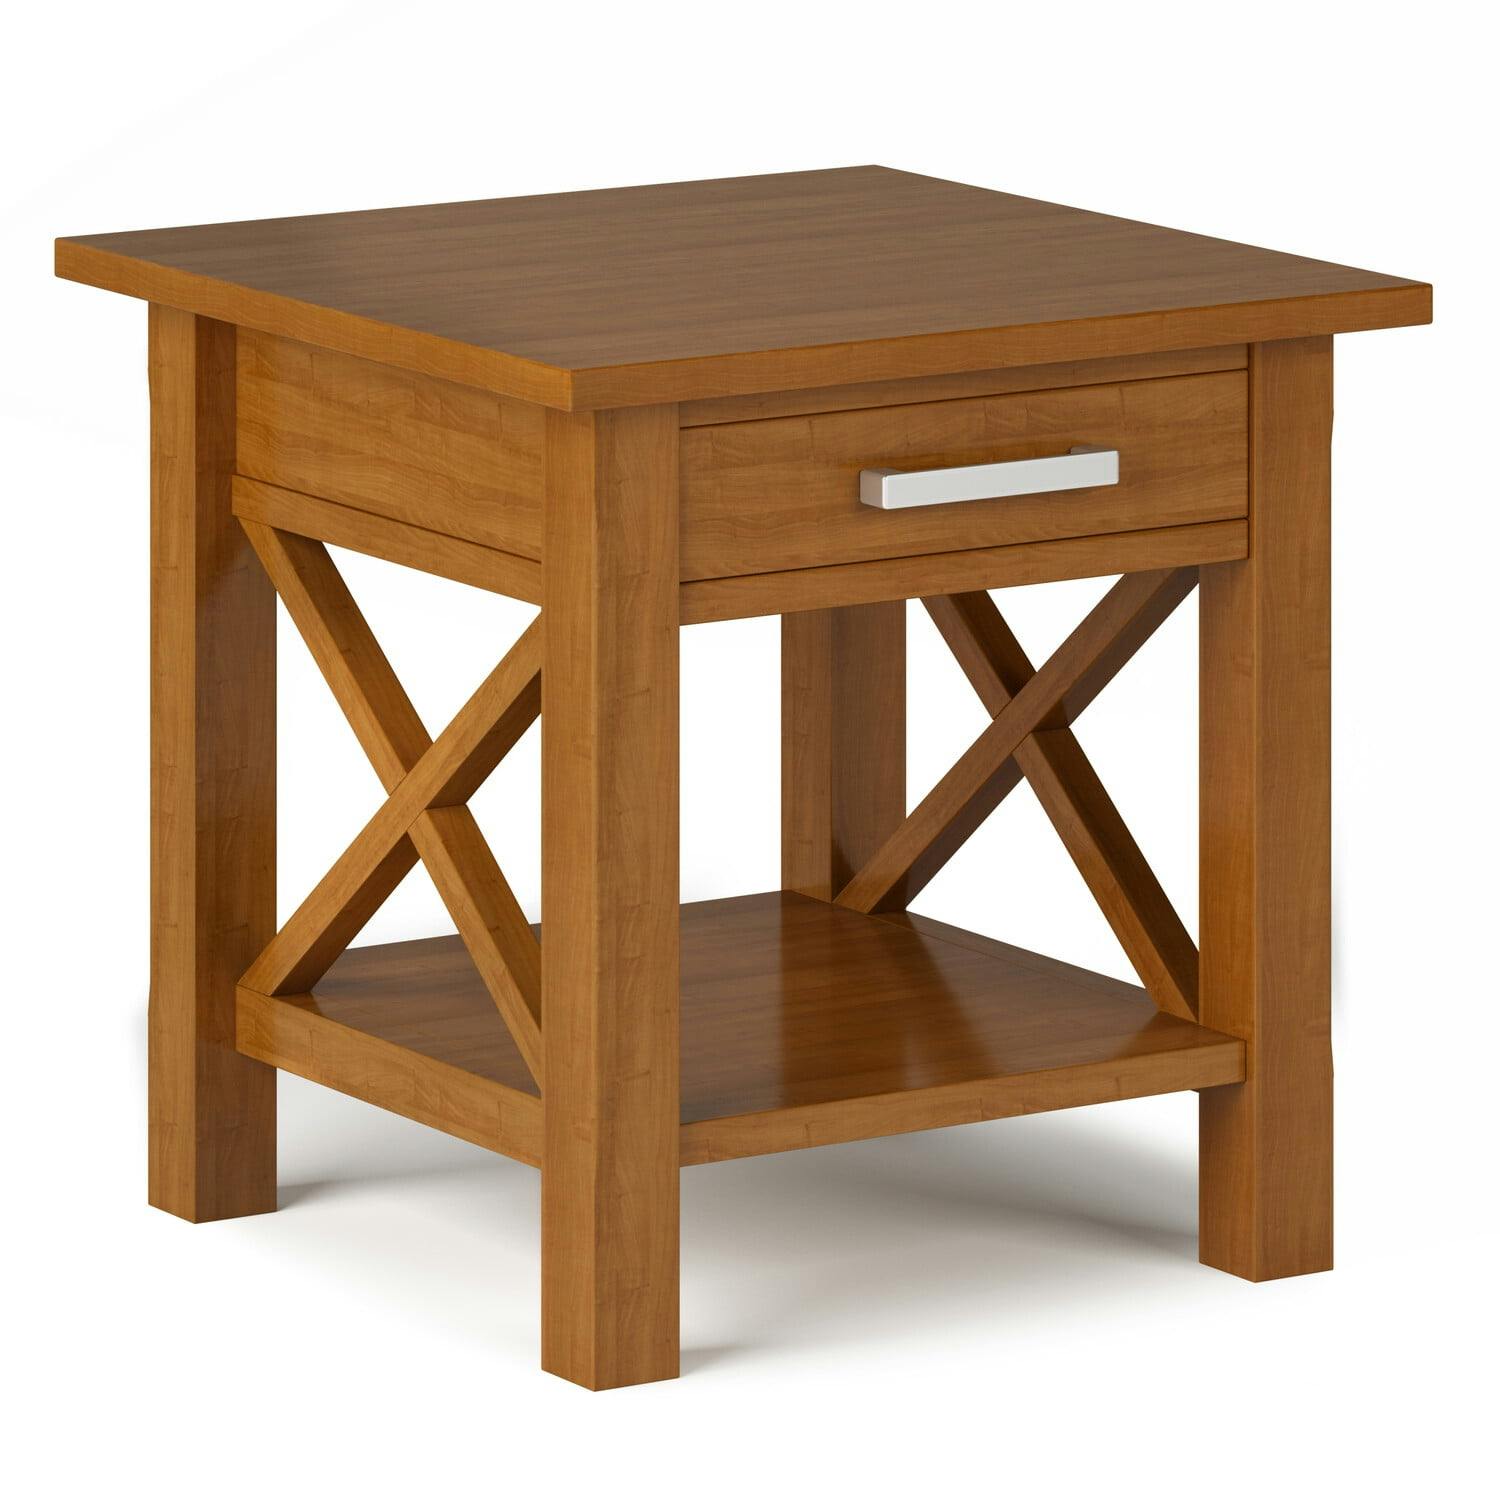 Kitchener Light Golden Brown Solid Wood Square End Table with Storage